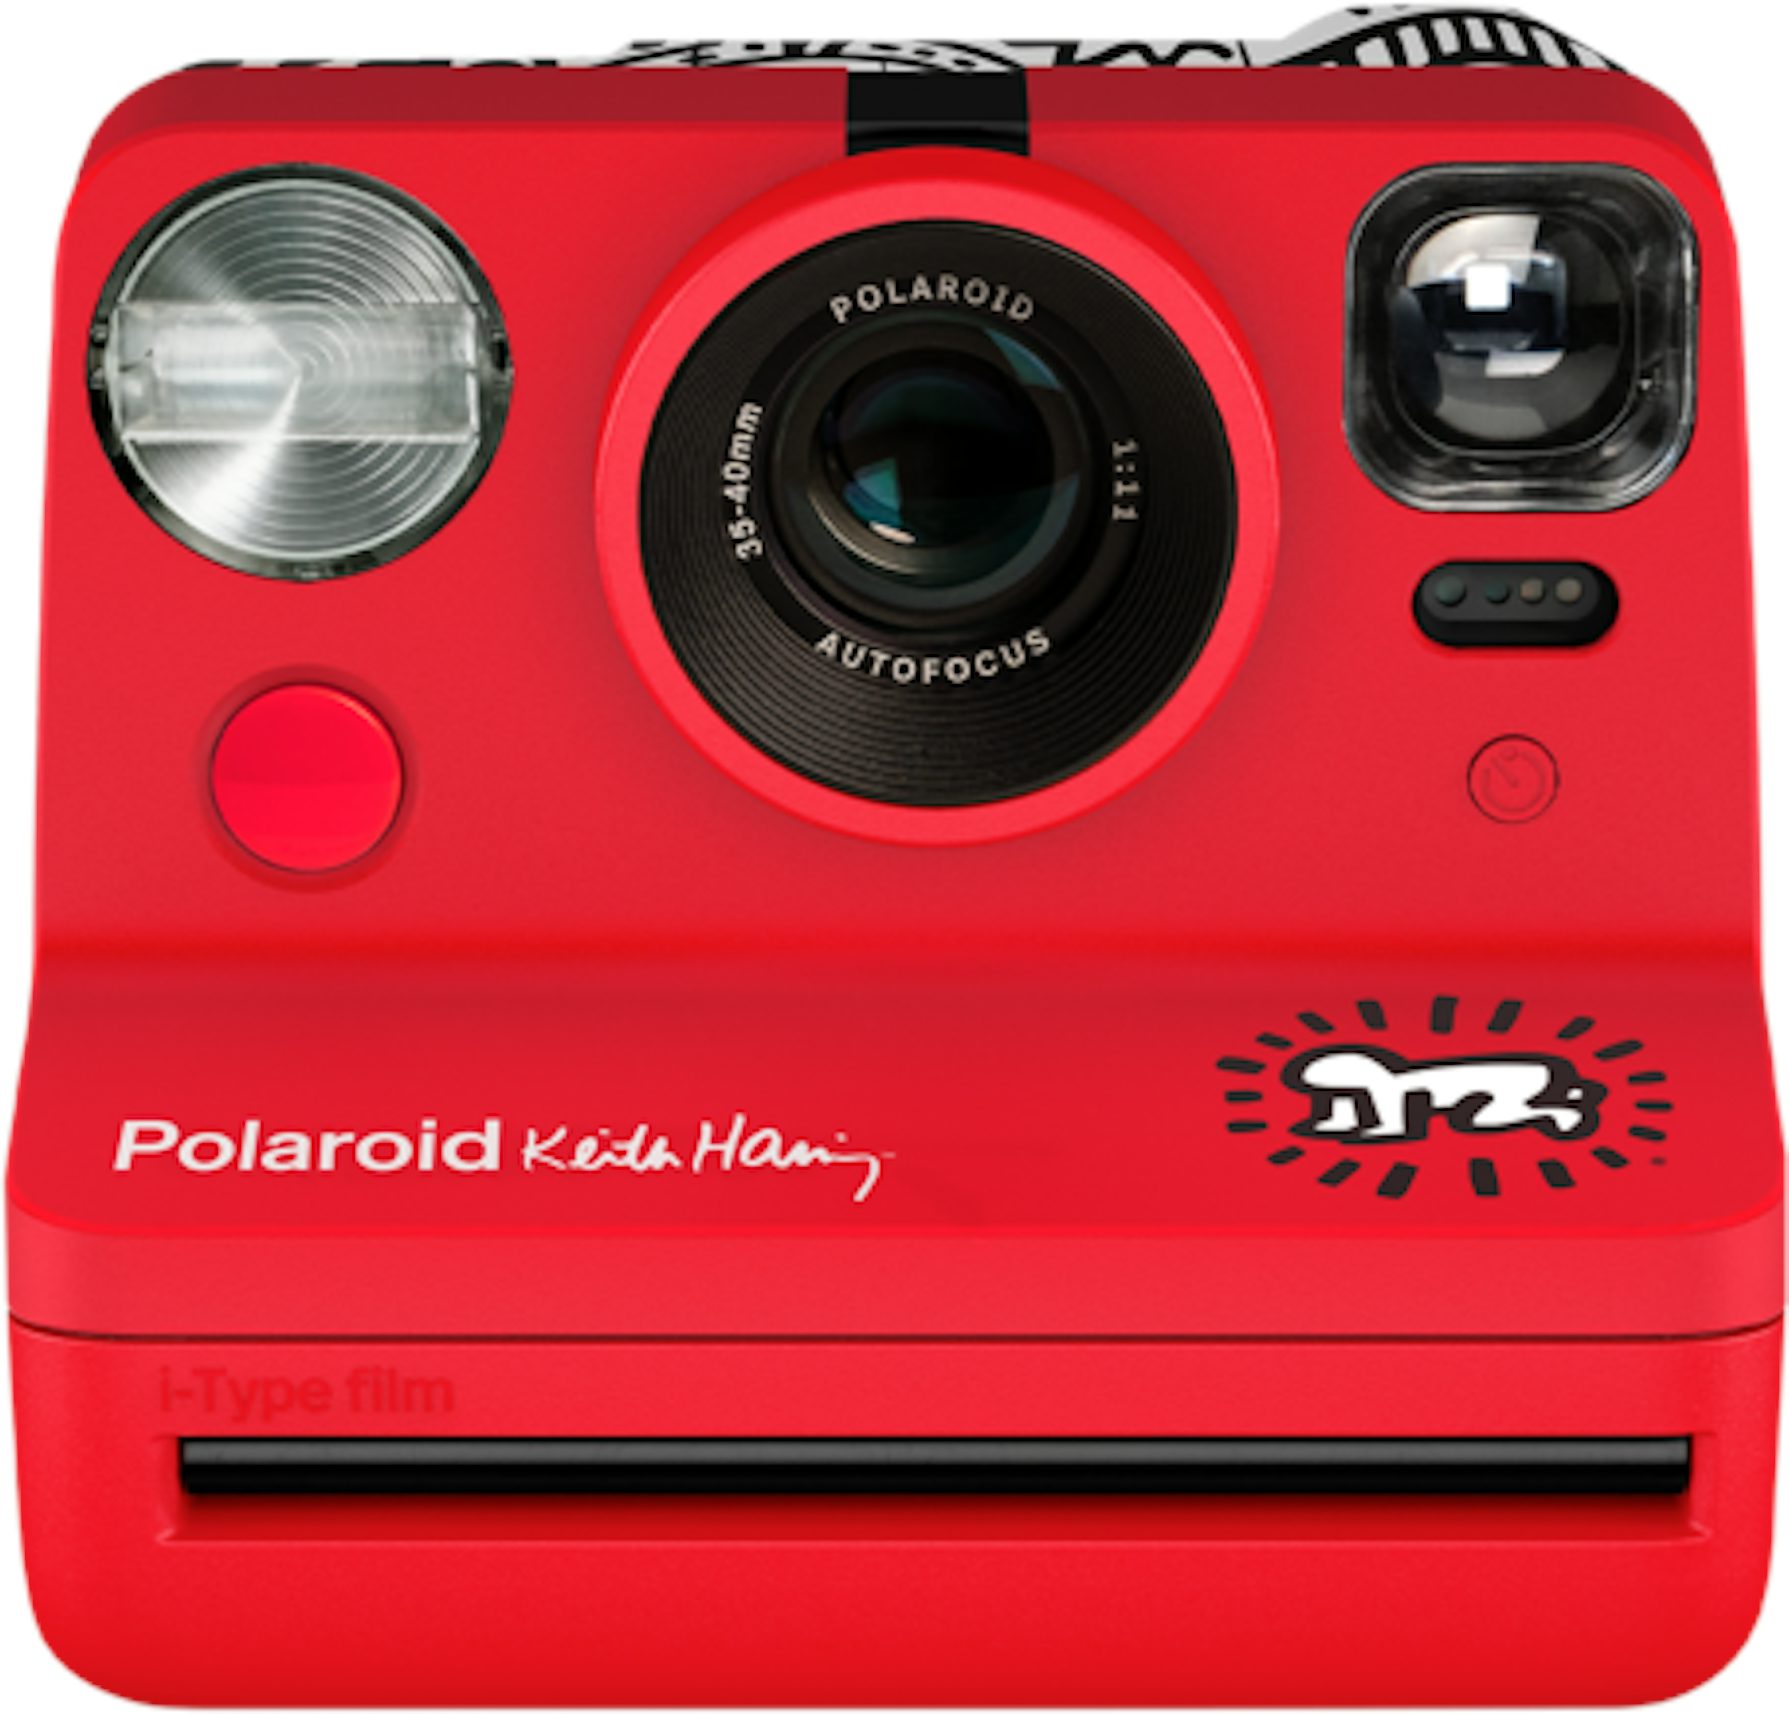 https://images.stockx.com/images/Polaroid-Now-i-Type-Instant-Camera-Keith-Haring-Edition-Camera.png?fit=fill&bg=FFFFFF&w=1200&h=857&fm=jpg&auto=compress&dpr=2&trim=color&updated_at=1627416039&q=60